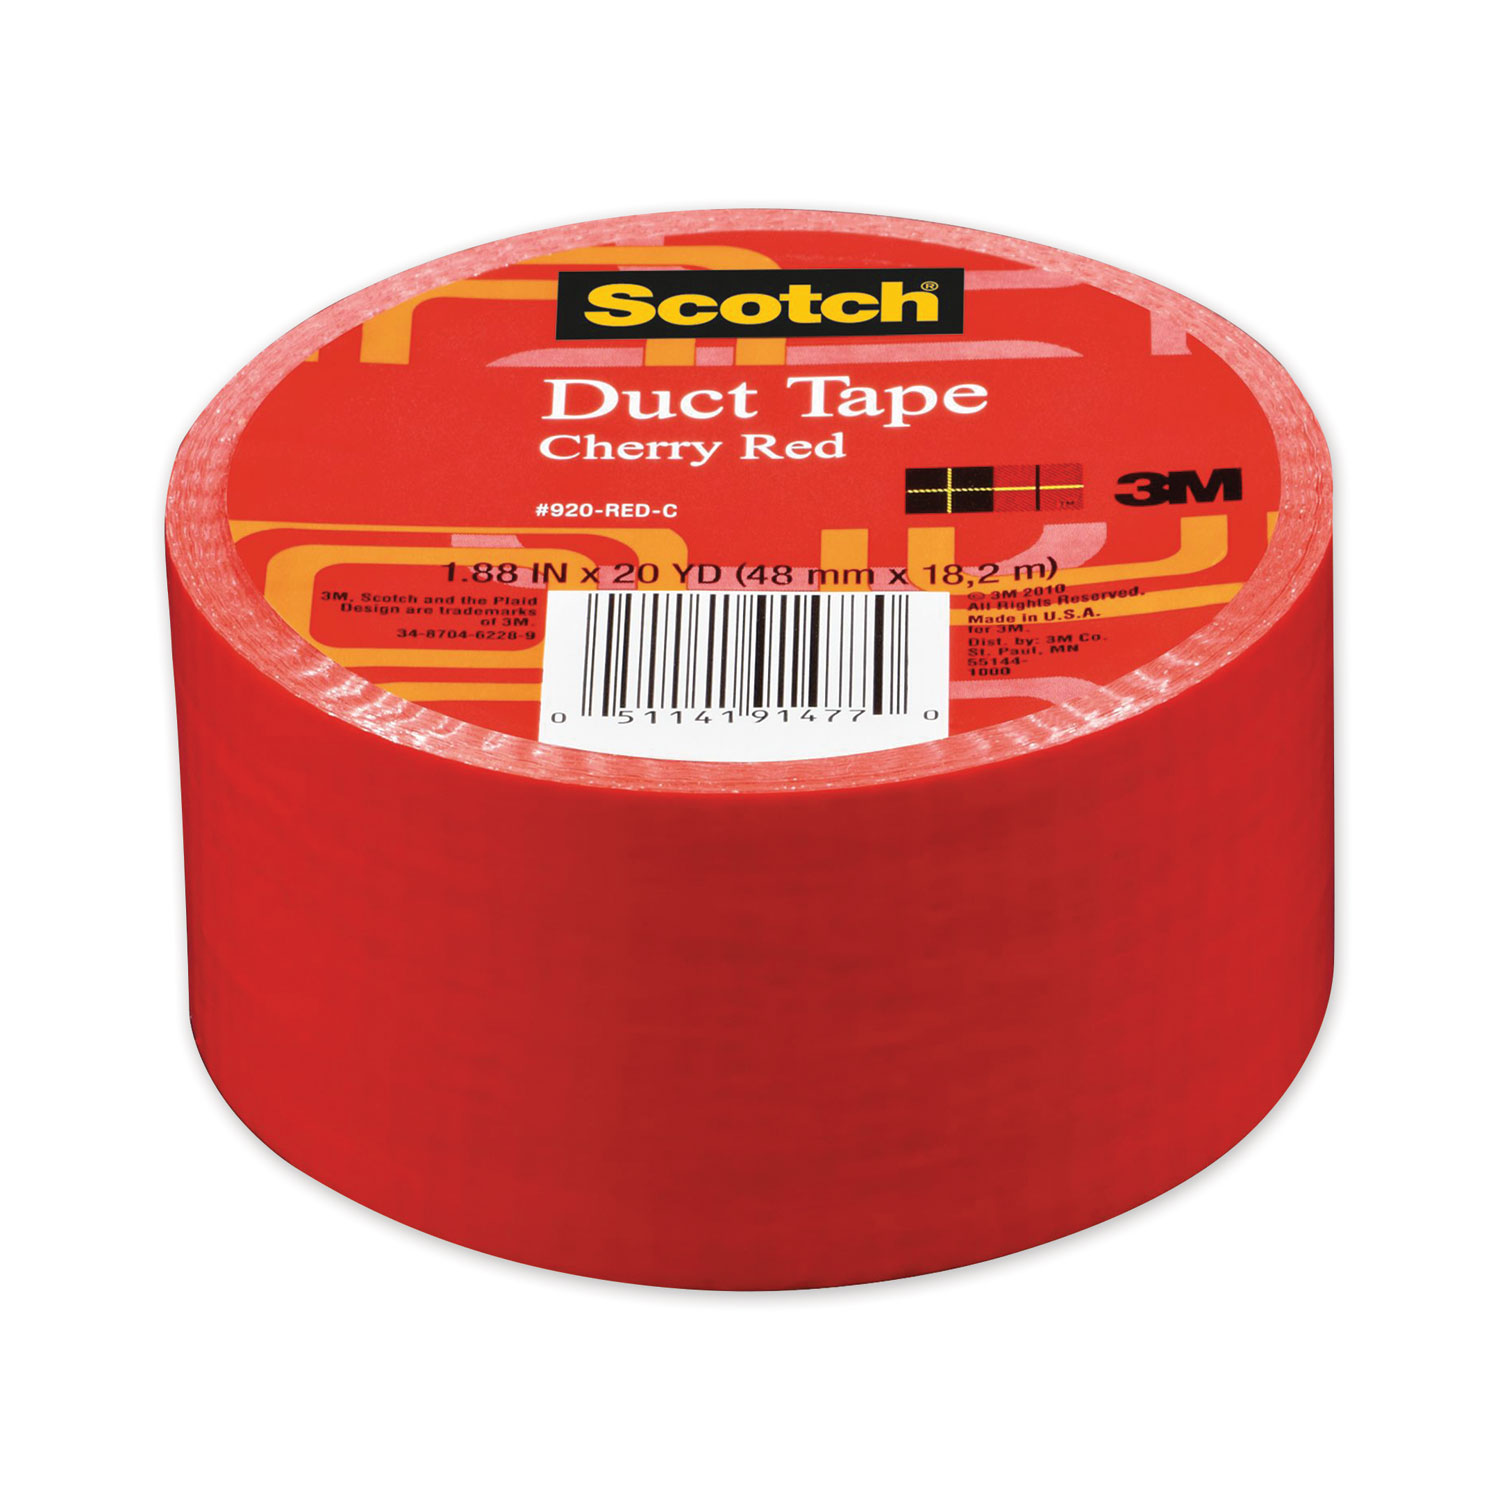  Scotch 920-RED-C Duct Tape, 1.88 x 20 yds, Cherry Red (MMM70005058188) 